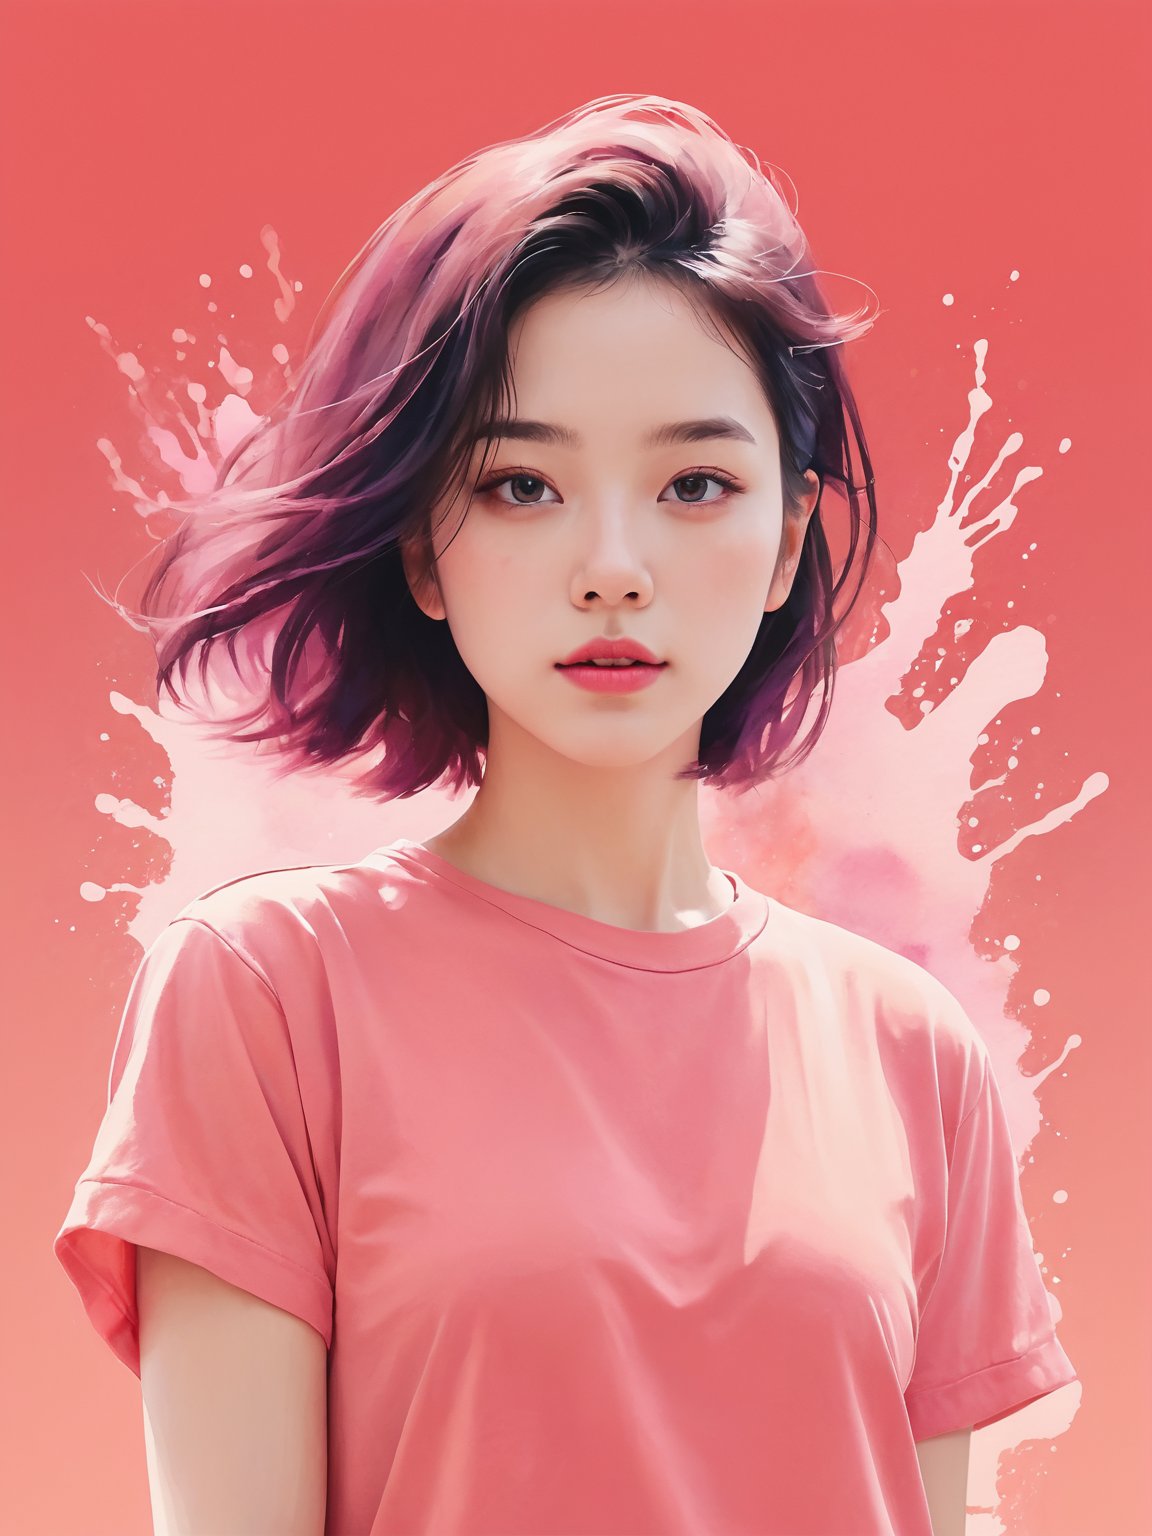 (Masterpiece:1),(highest quality:1.12),a girl,cover art,shirt,(coral:1.1),portrait,magenta background,coral splash,sy3,SMM,watercolor style,minimalist style,